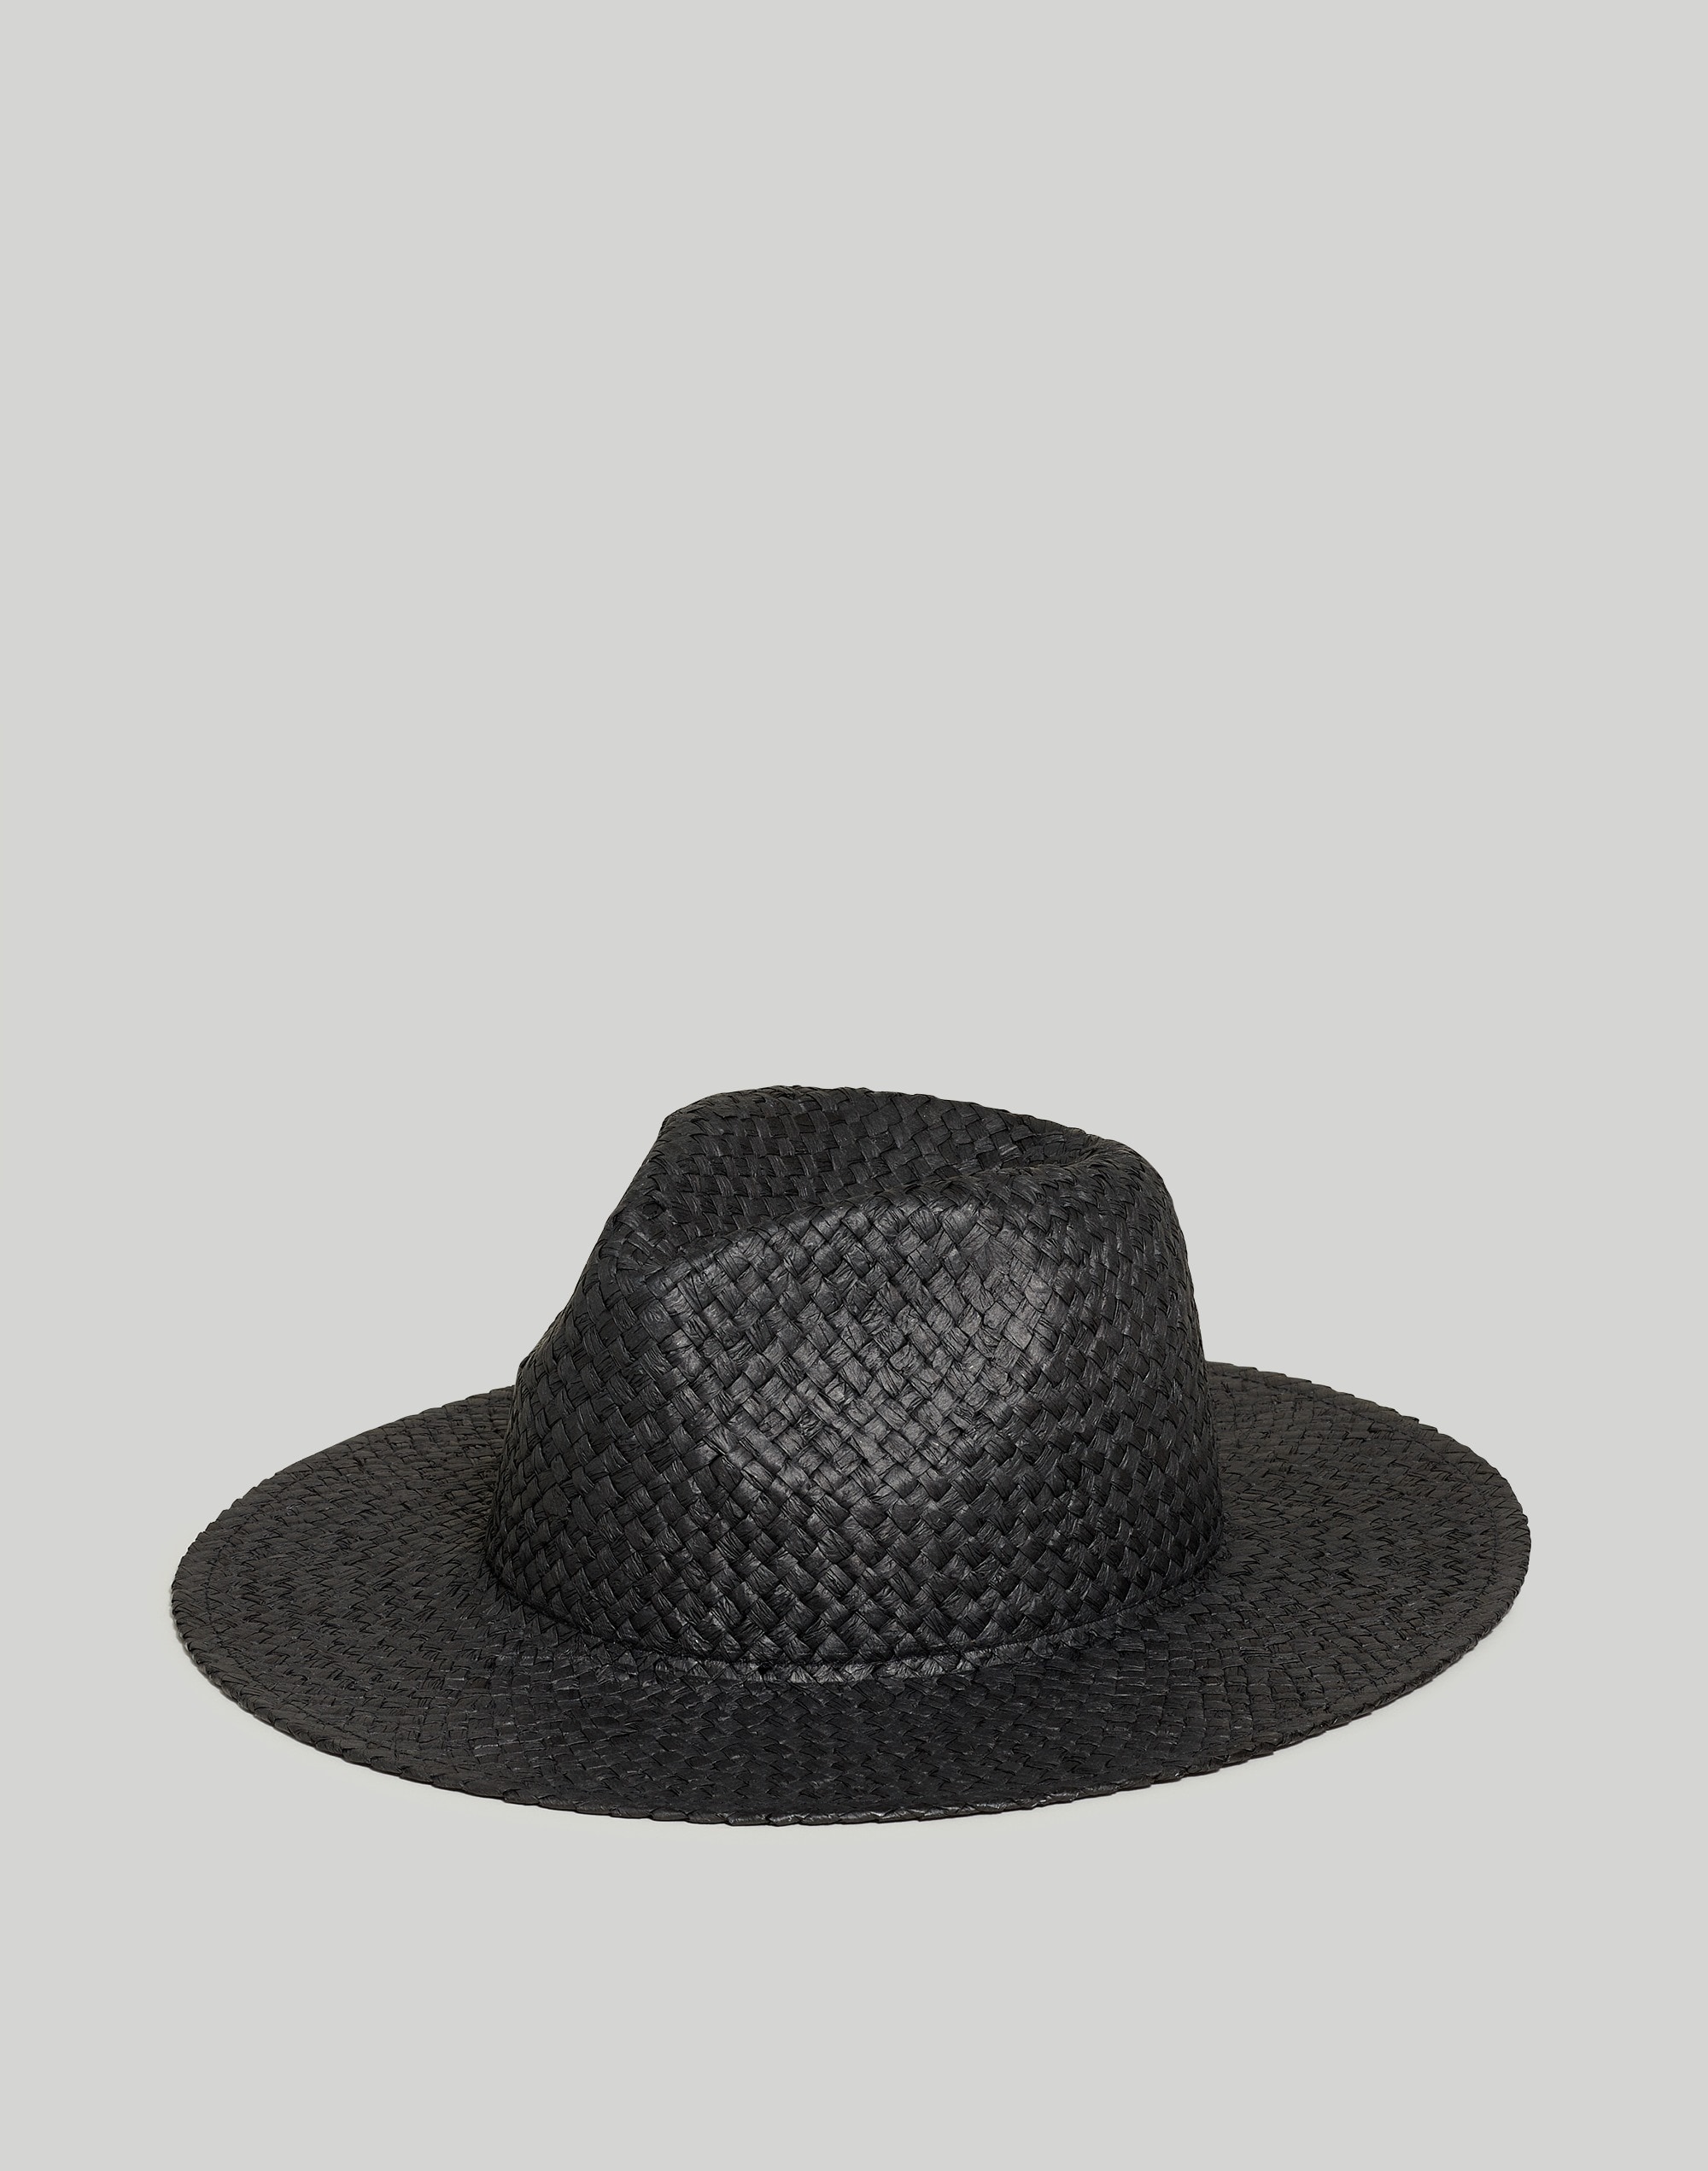 Woven Straw Hat | Madewell